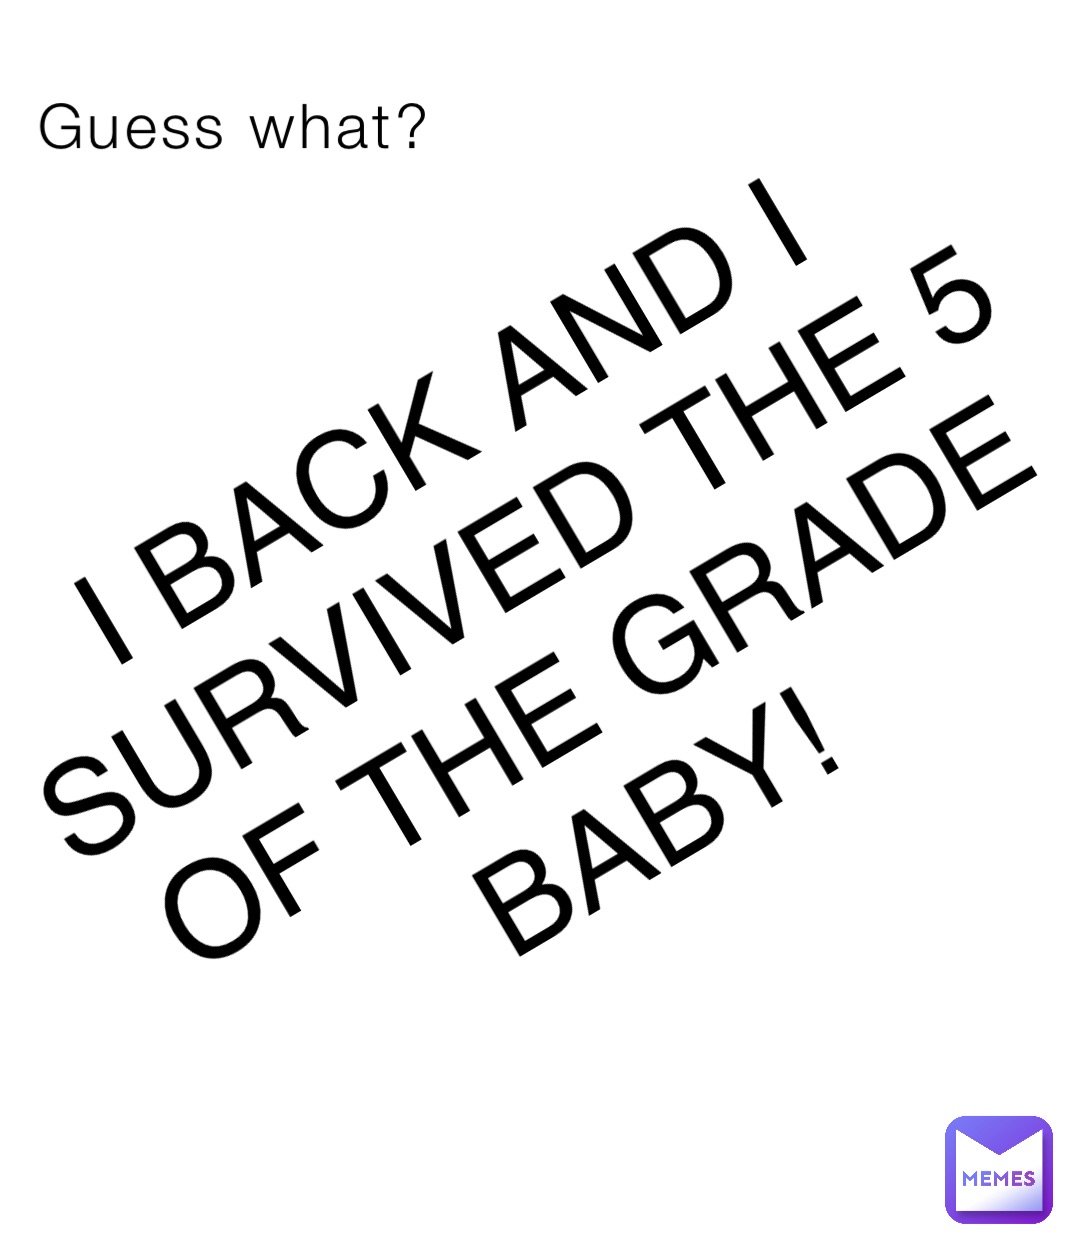 Guess what? I BACK AND I SURVIVED THE 5 OF THE GRADE BABY!